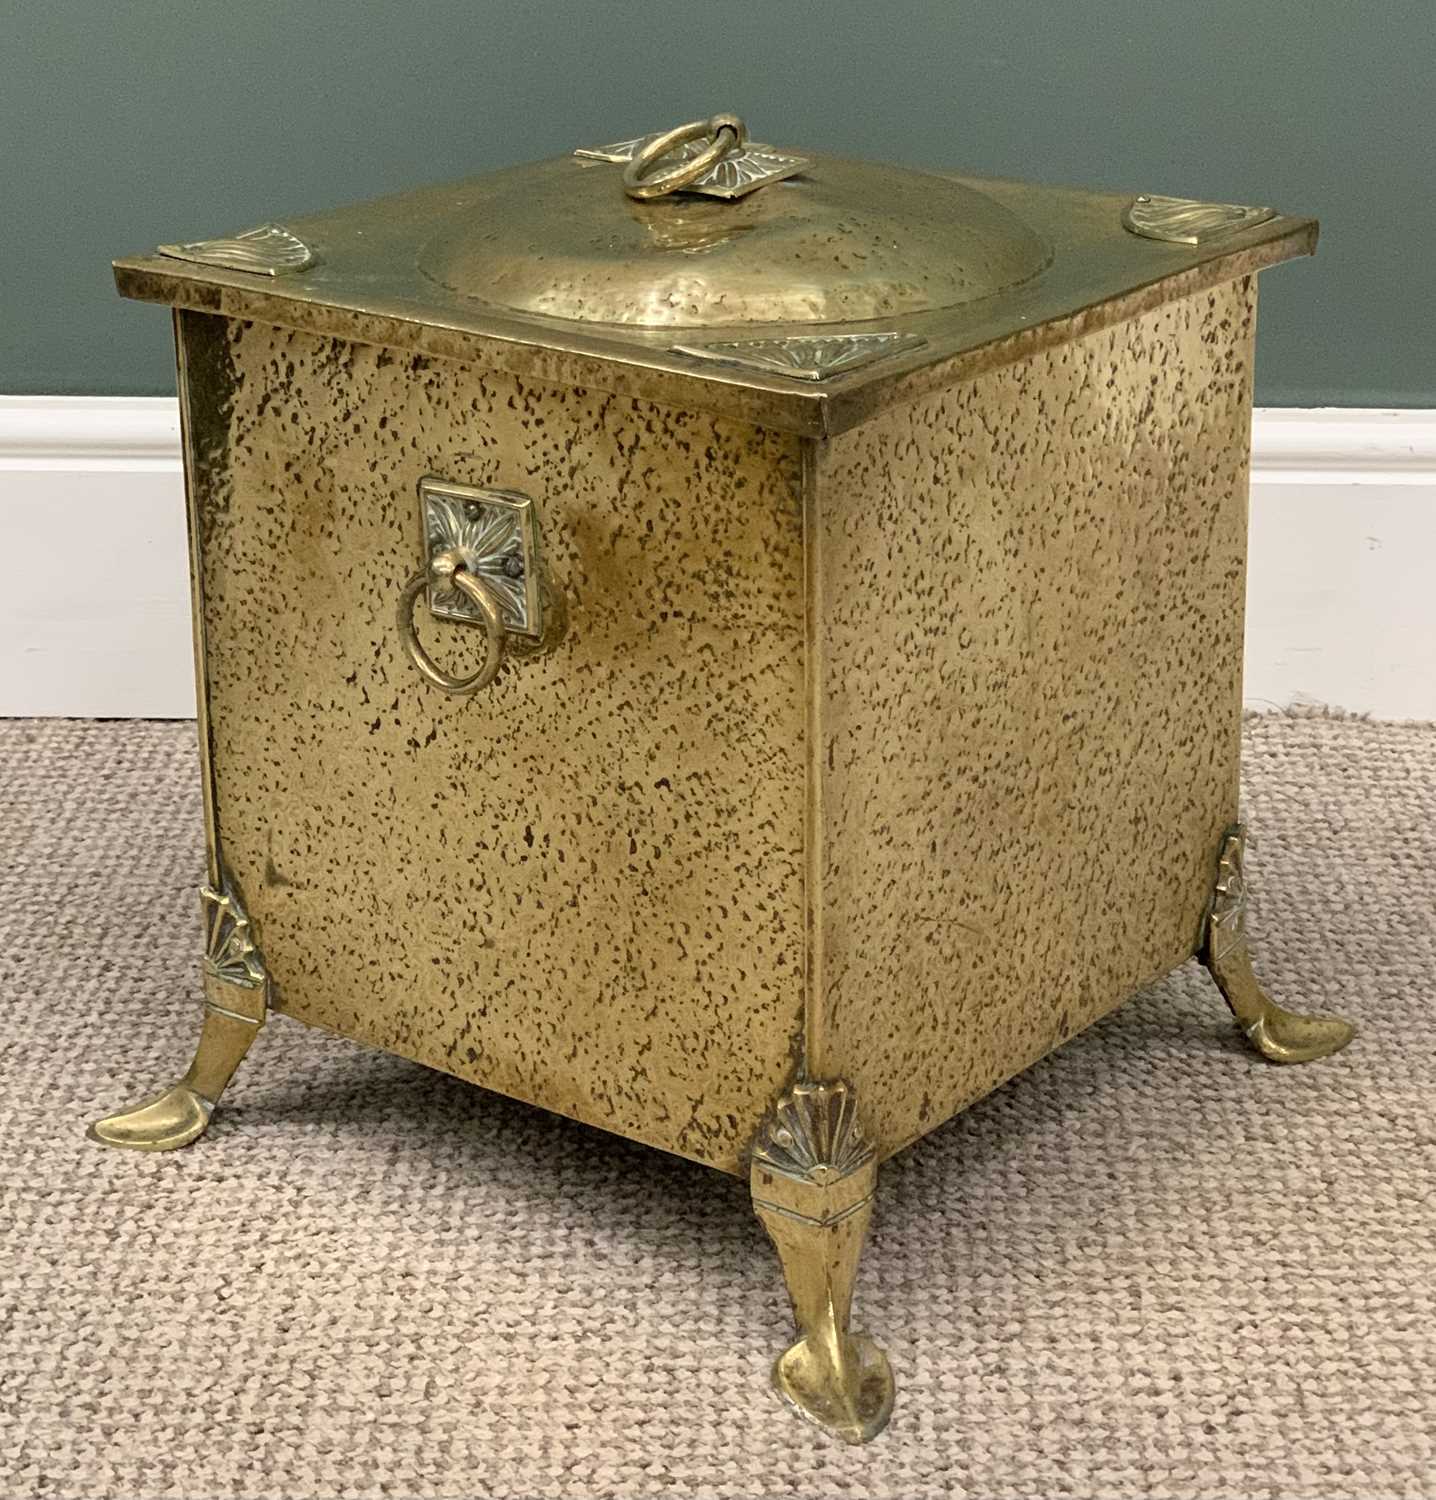 ARTS & CRAFTS STYLE LIDDED BRASS COAL BOX, ring lid lift and carry handles, Egyptian fan type - Image 2 of 4